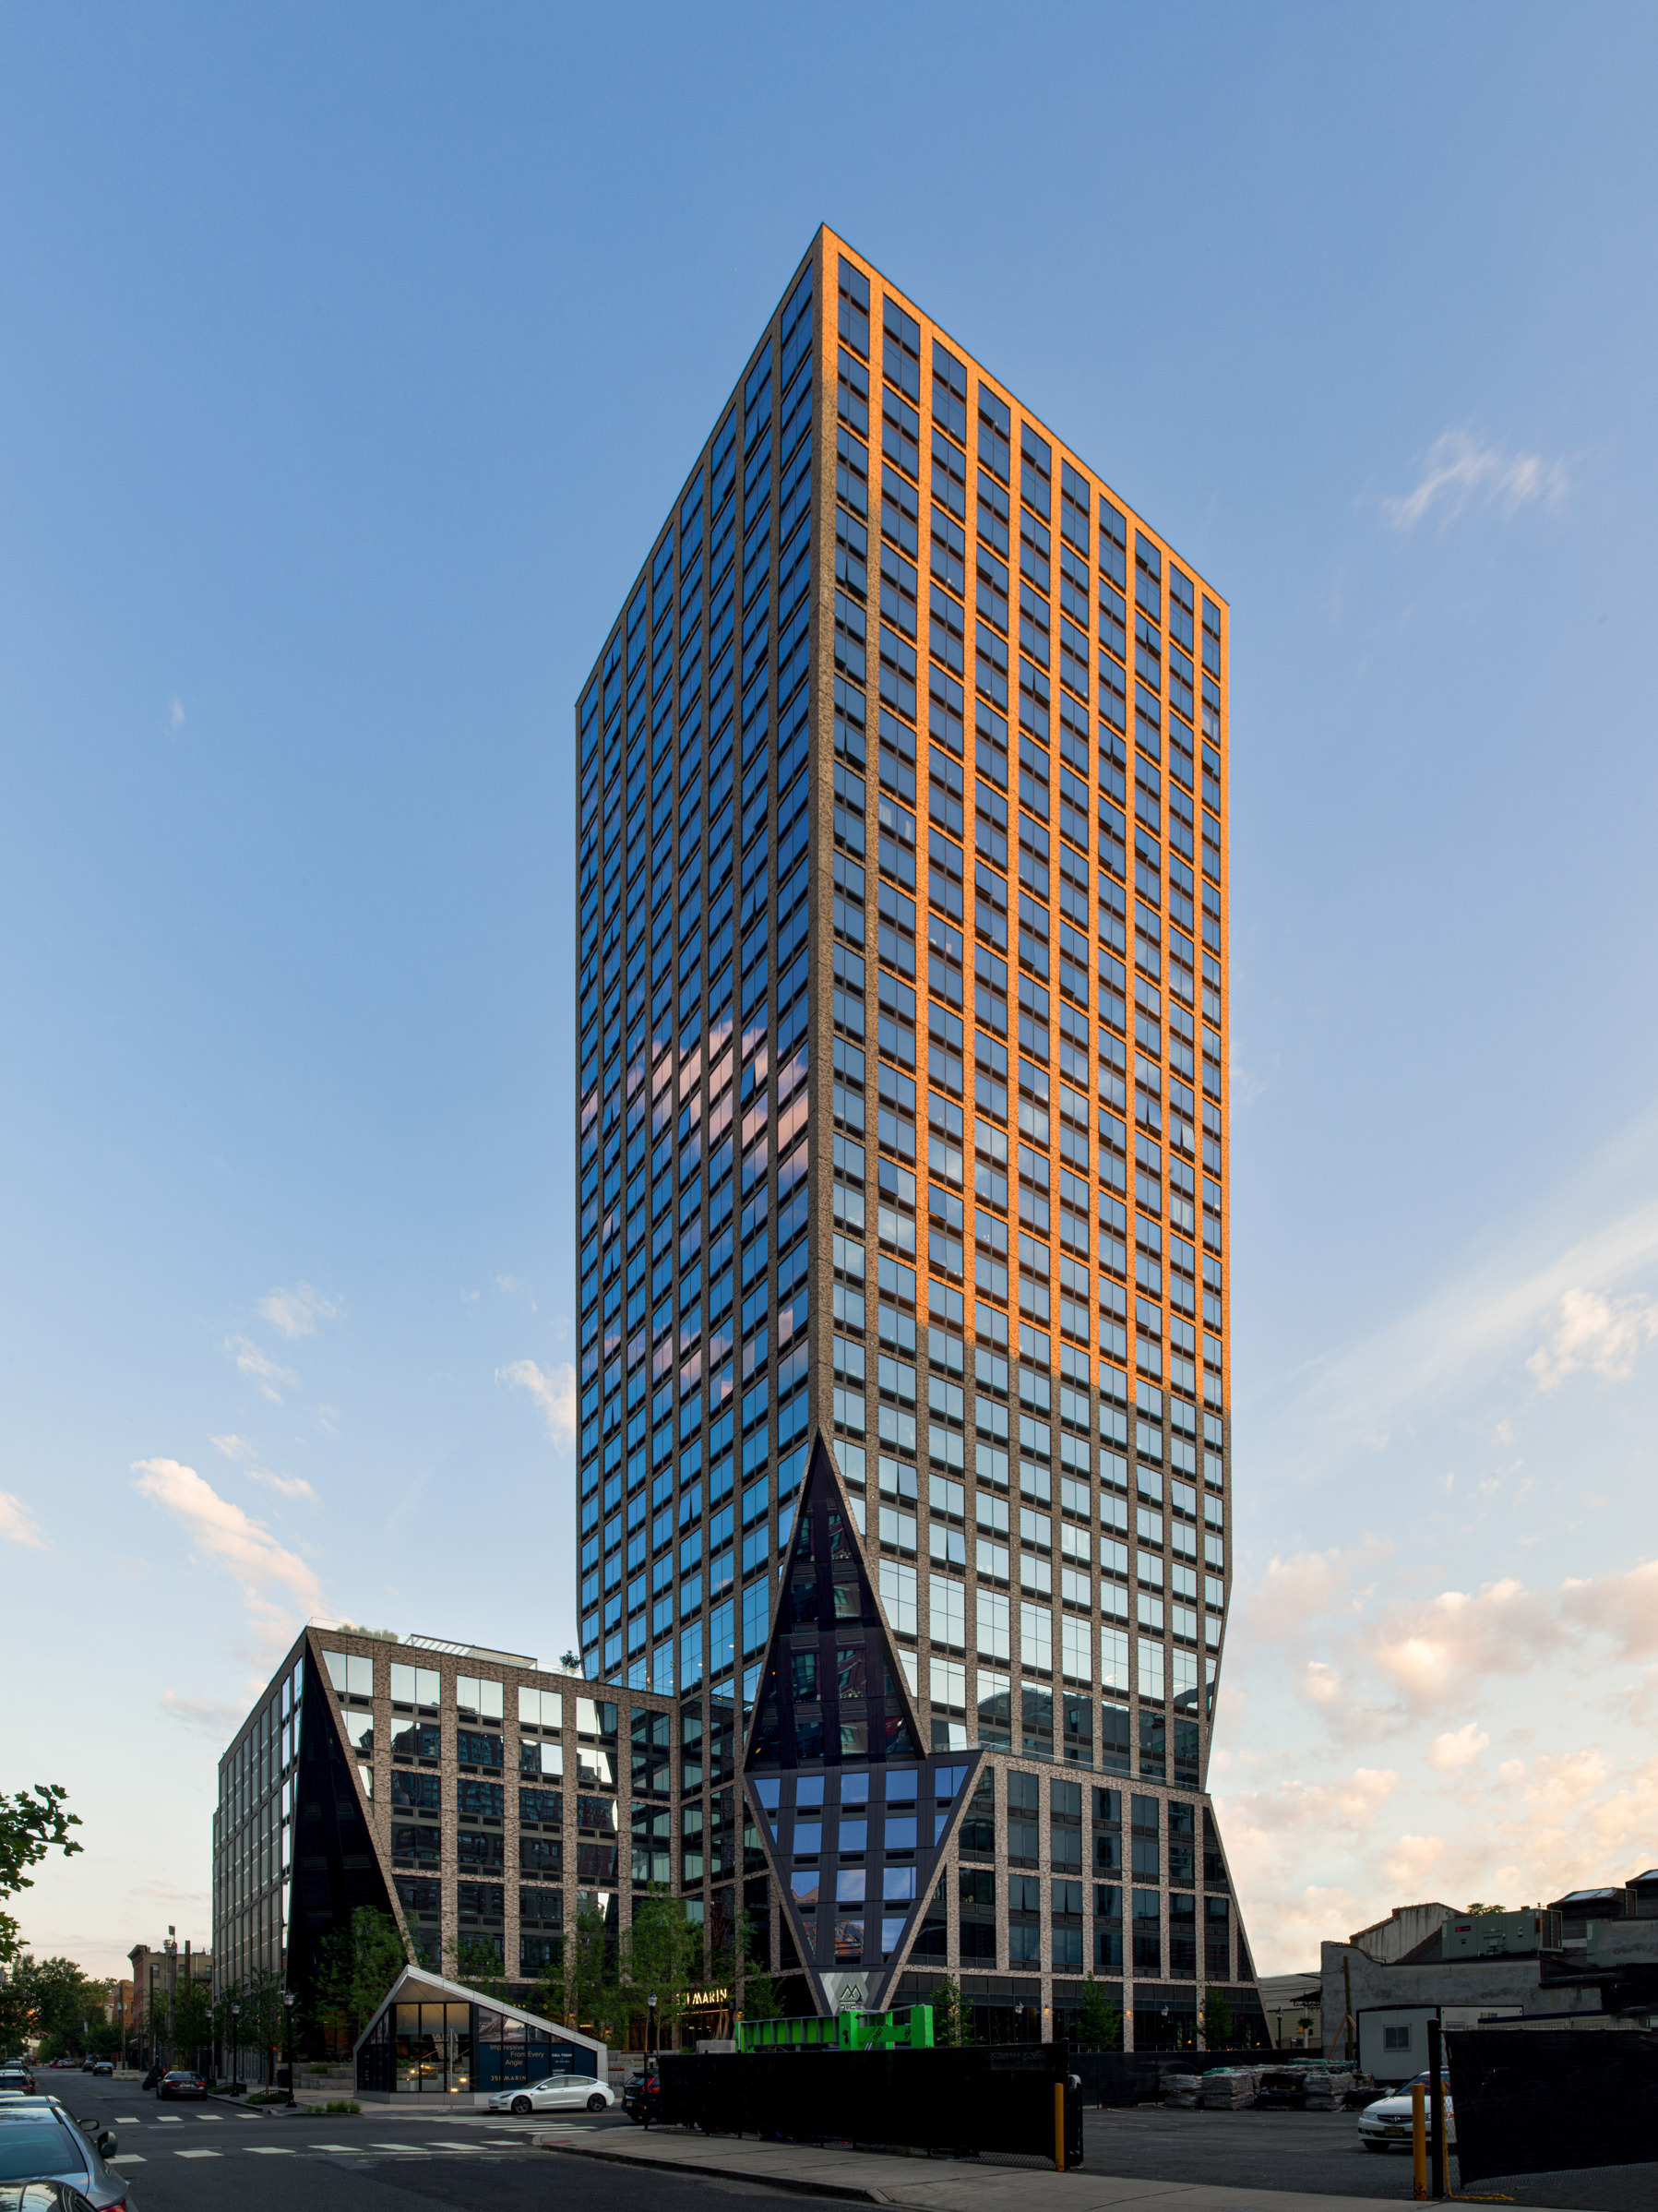 Modern skyscraper at dusk with reflective glass facade and prominent geometric lines, featuring a juxtaposed lower structure with a triangulated design element, showcasing contemporary architectural innovation in an urban setting.